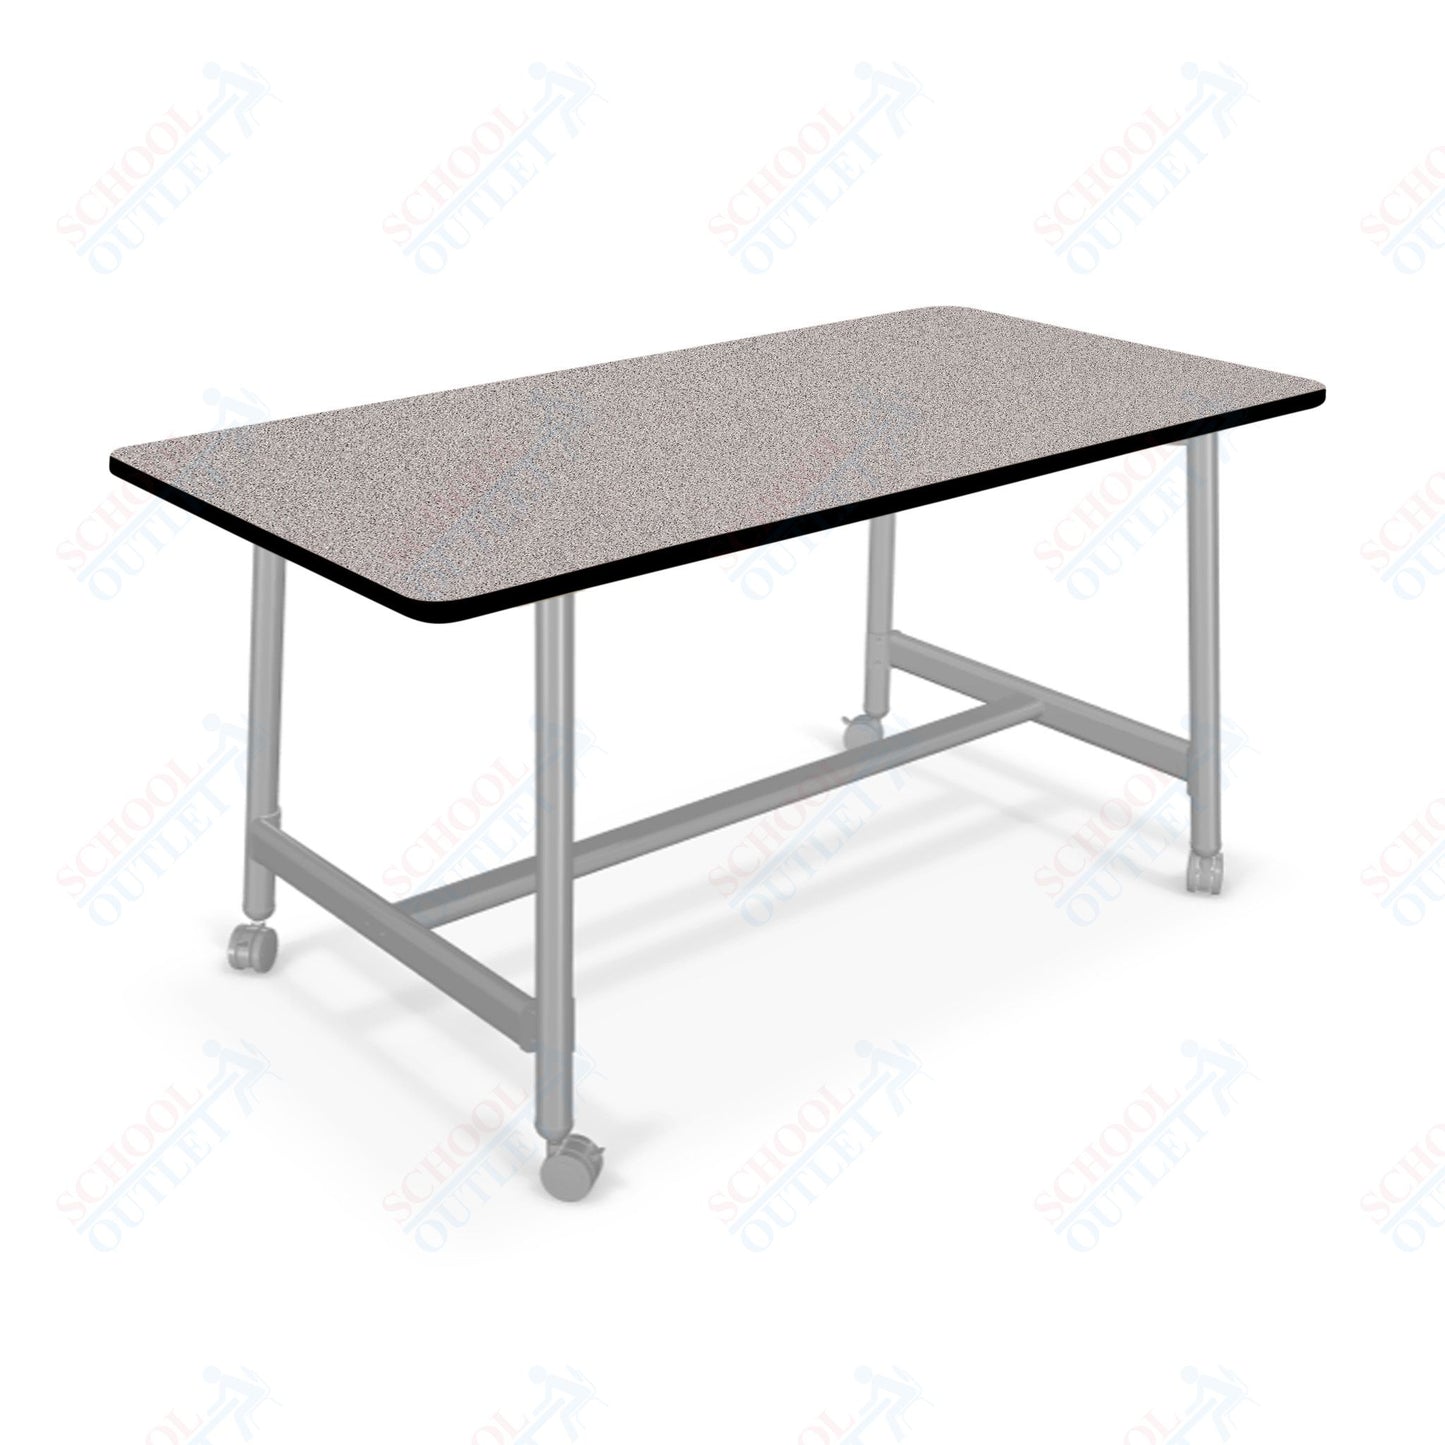 Mooreco Akt Table – 30"D x 72"W Rectangle, Laminate or Butcher Block Top, Fixed Height Available in 29"H, 36"H, or 42"H